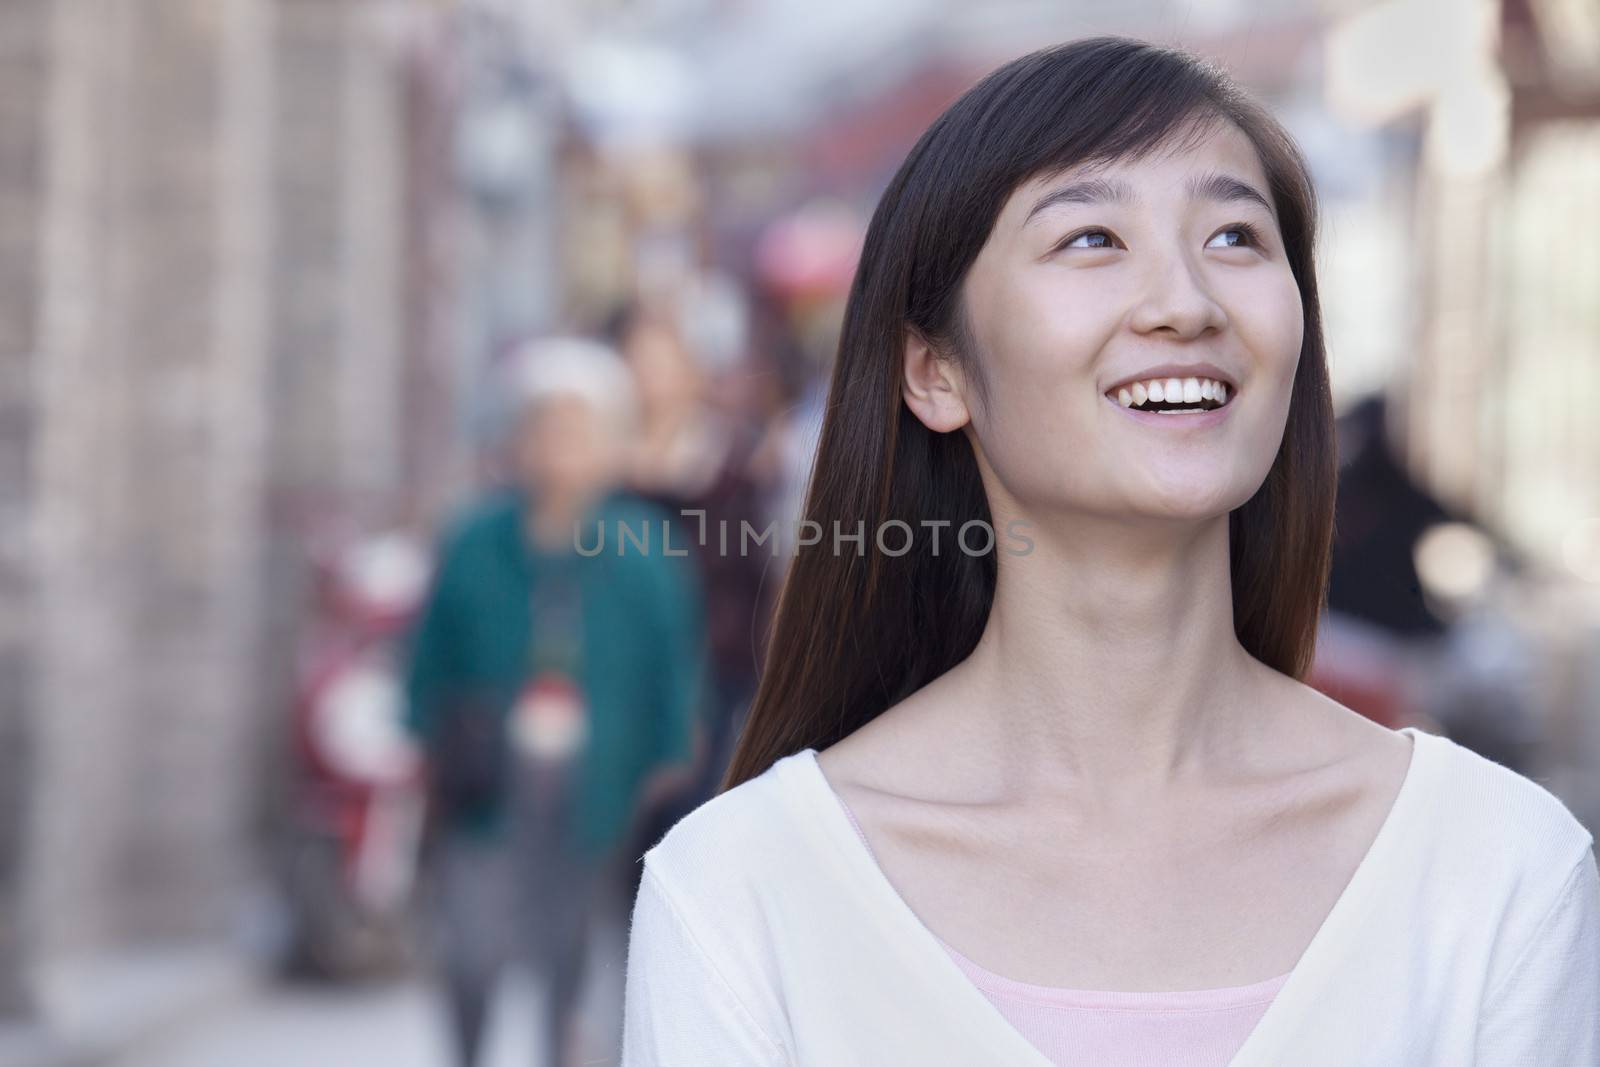 Portrait of Young Woman Outdoors in Beijing